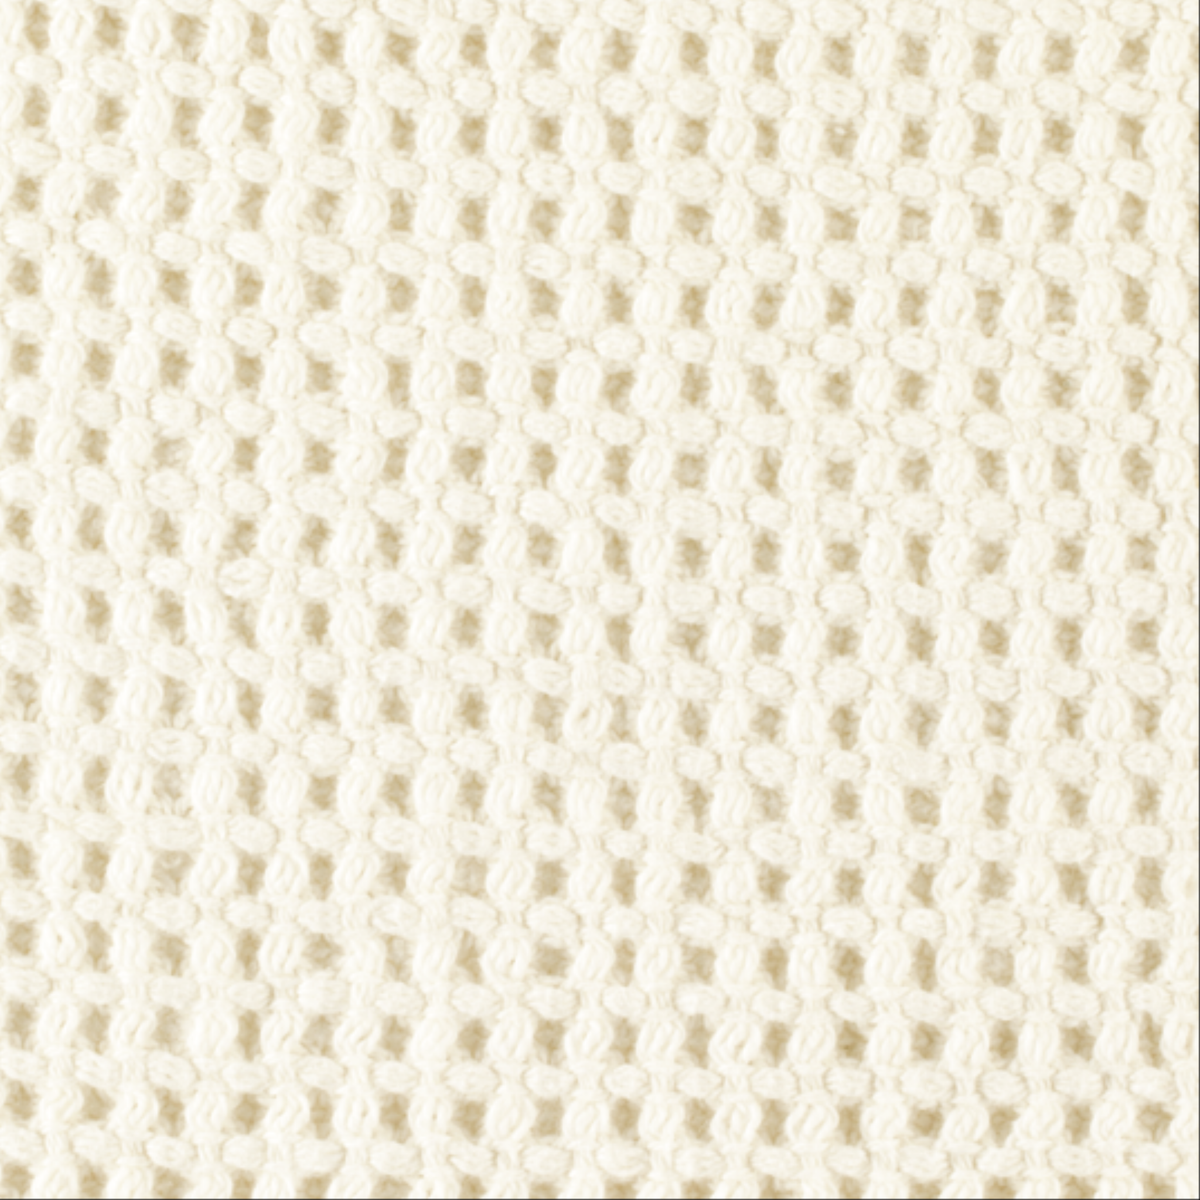 Swatch Sample Matouk Chatham Blanket in Ivory Color